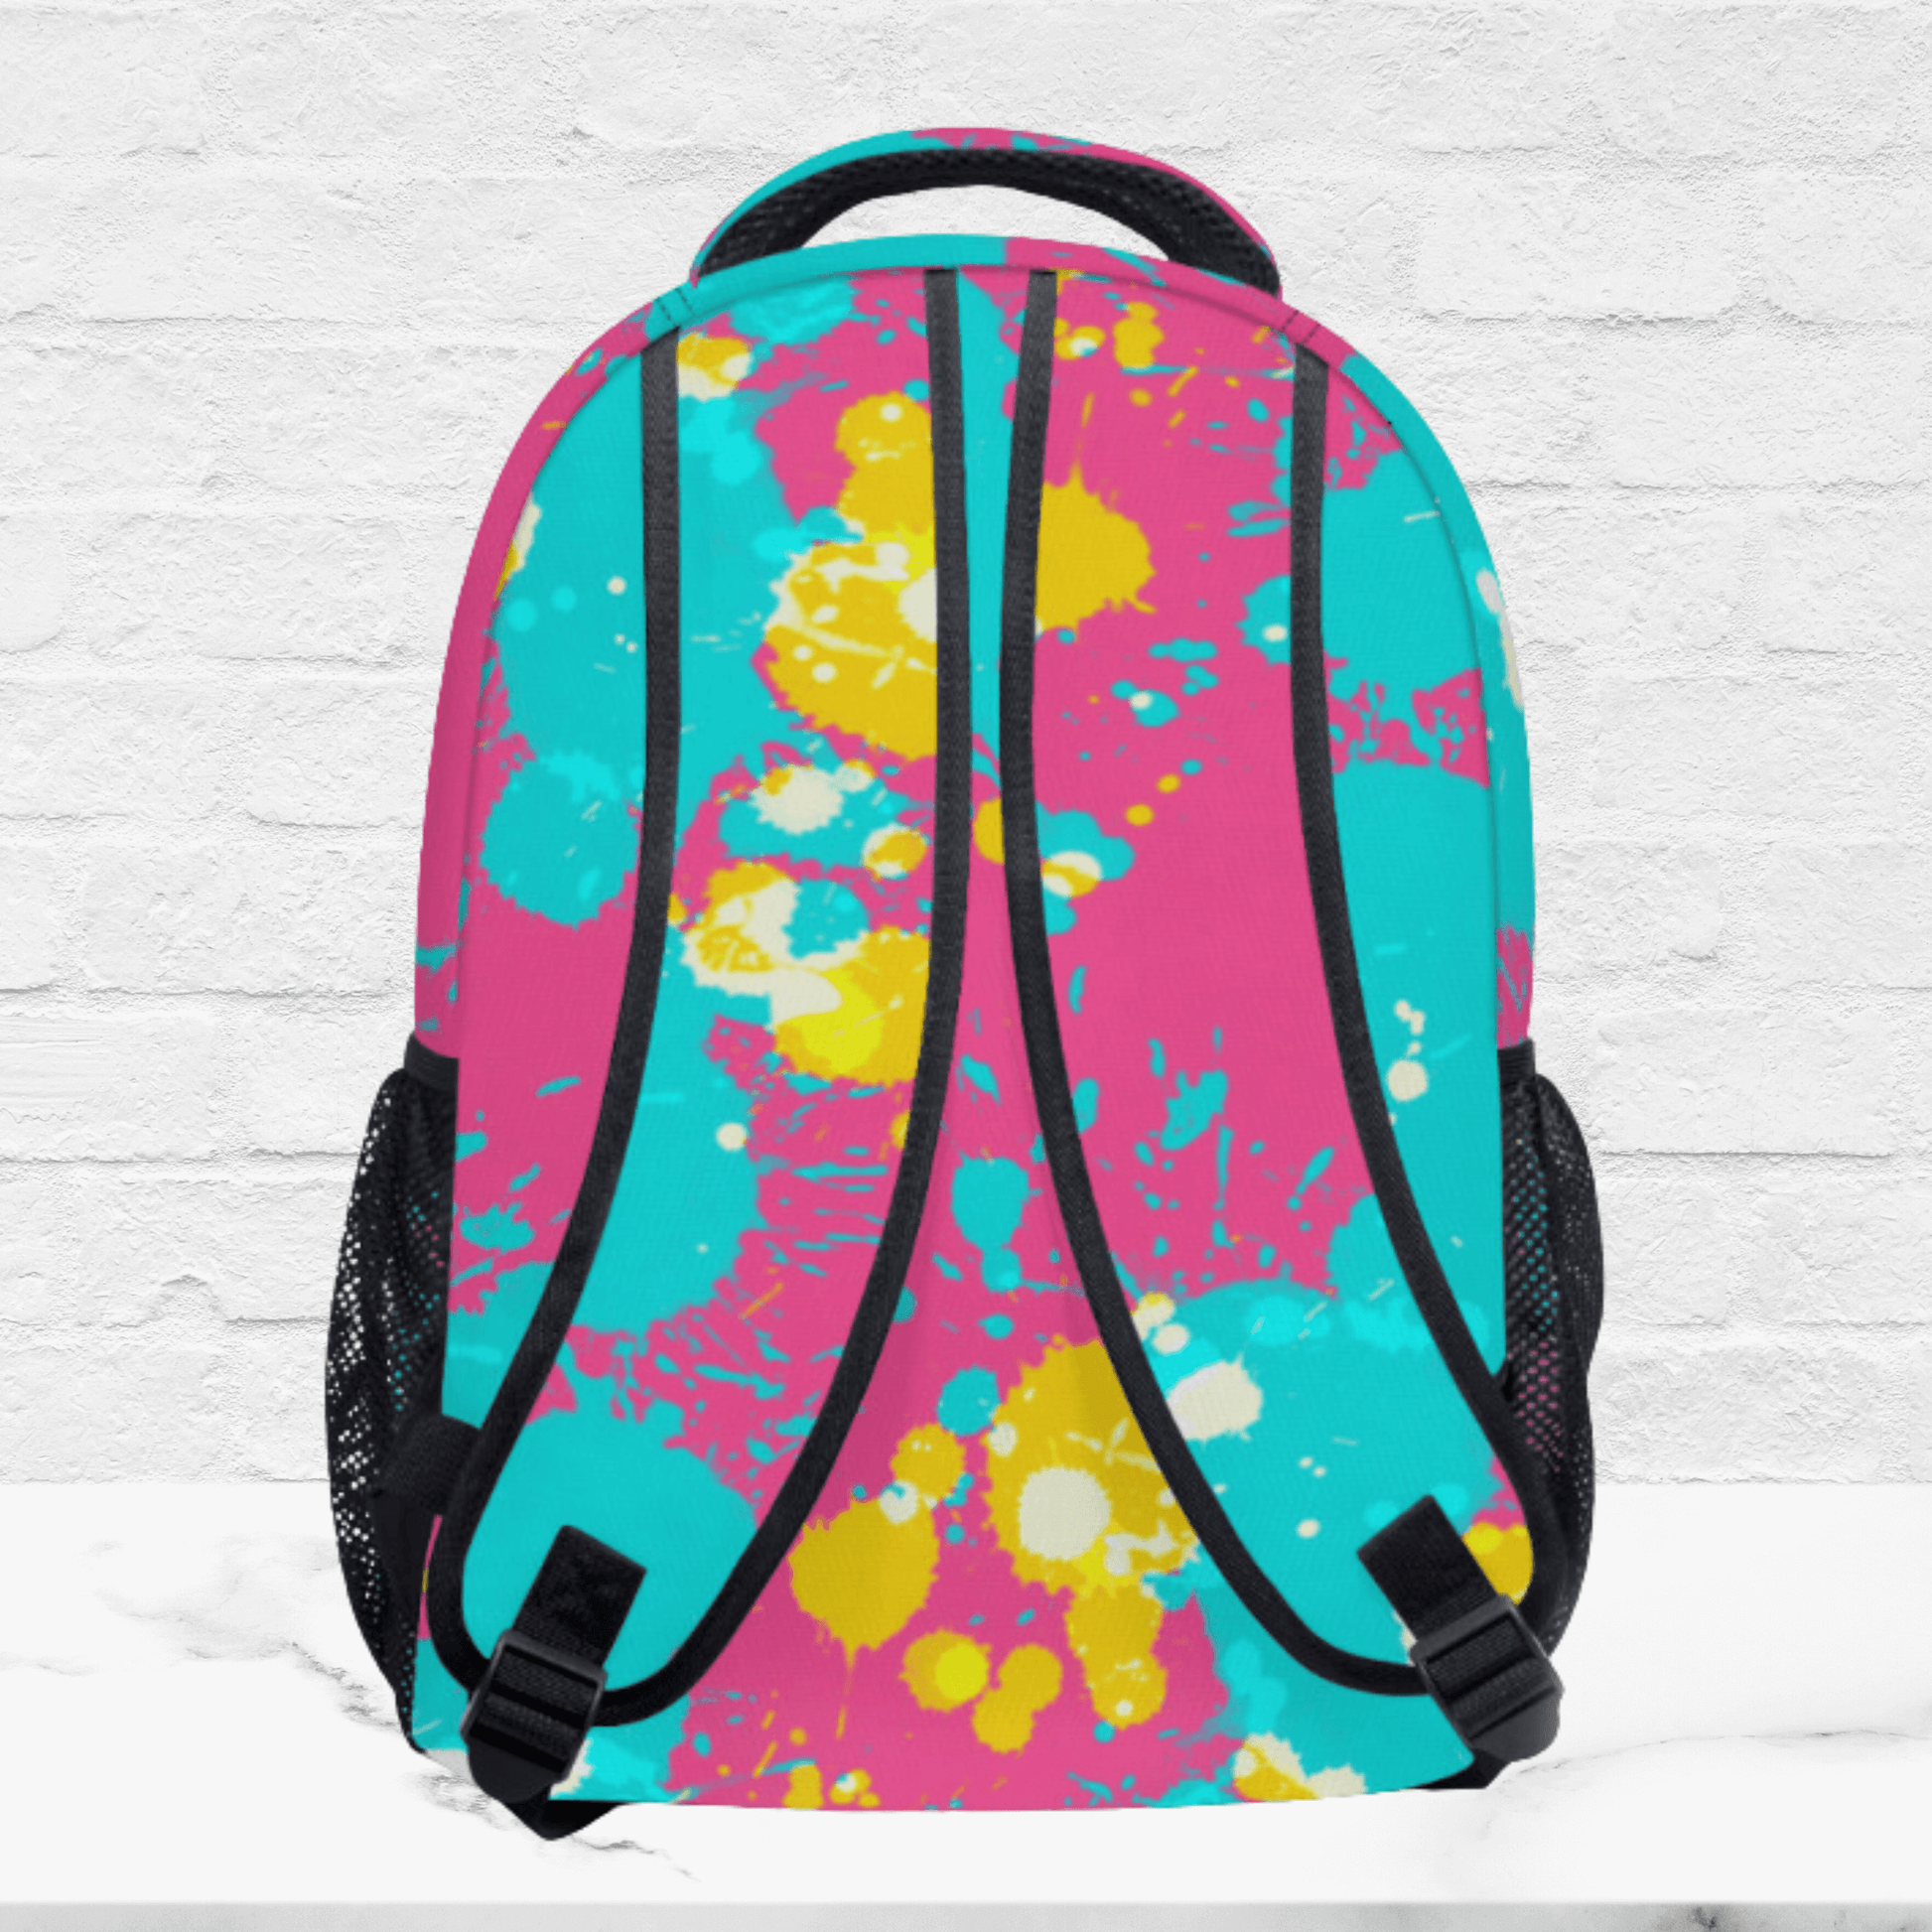 The backside of our turquoise and pink backpack for kids.